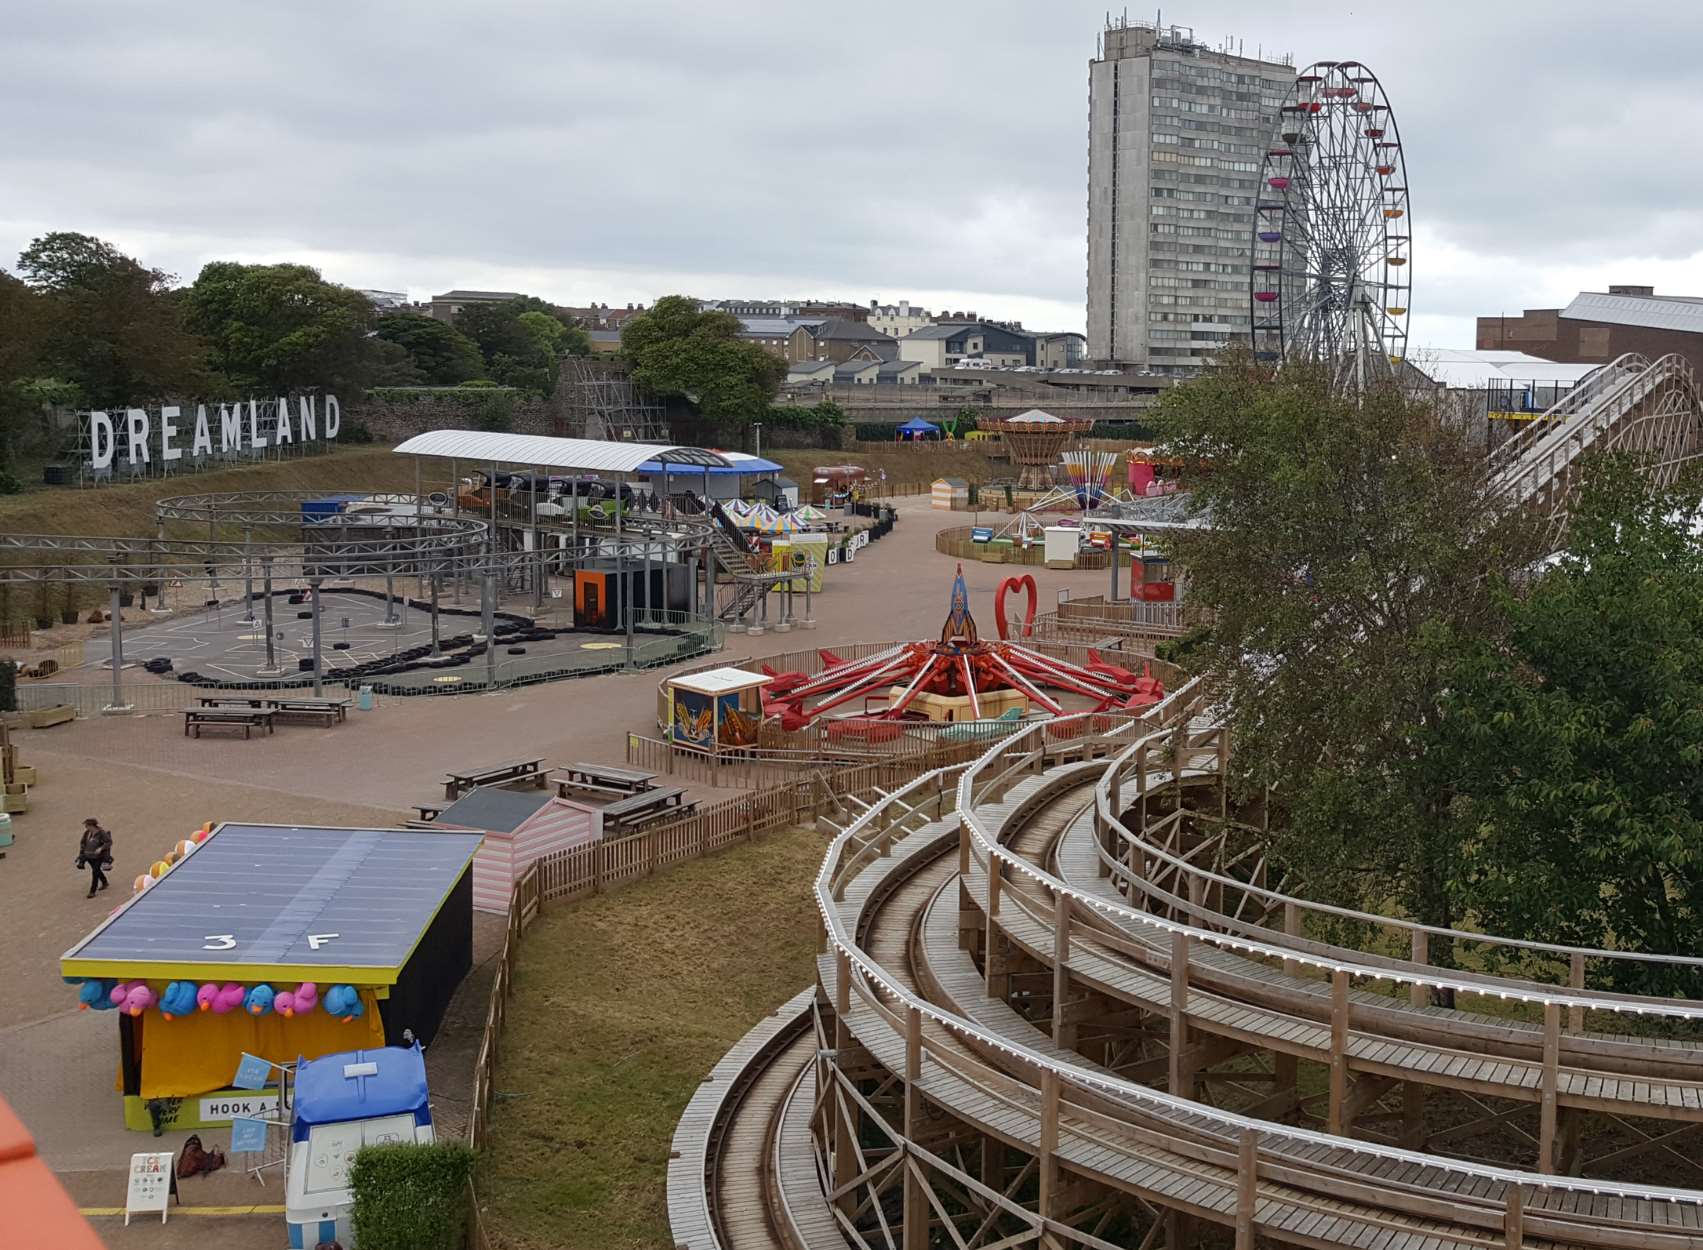 Dreamland in Margate receives £600,000 loan from Cayman Islands hedge ...